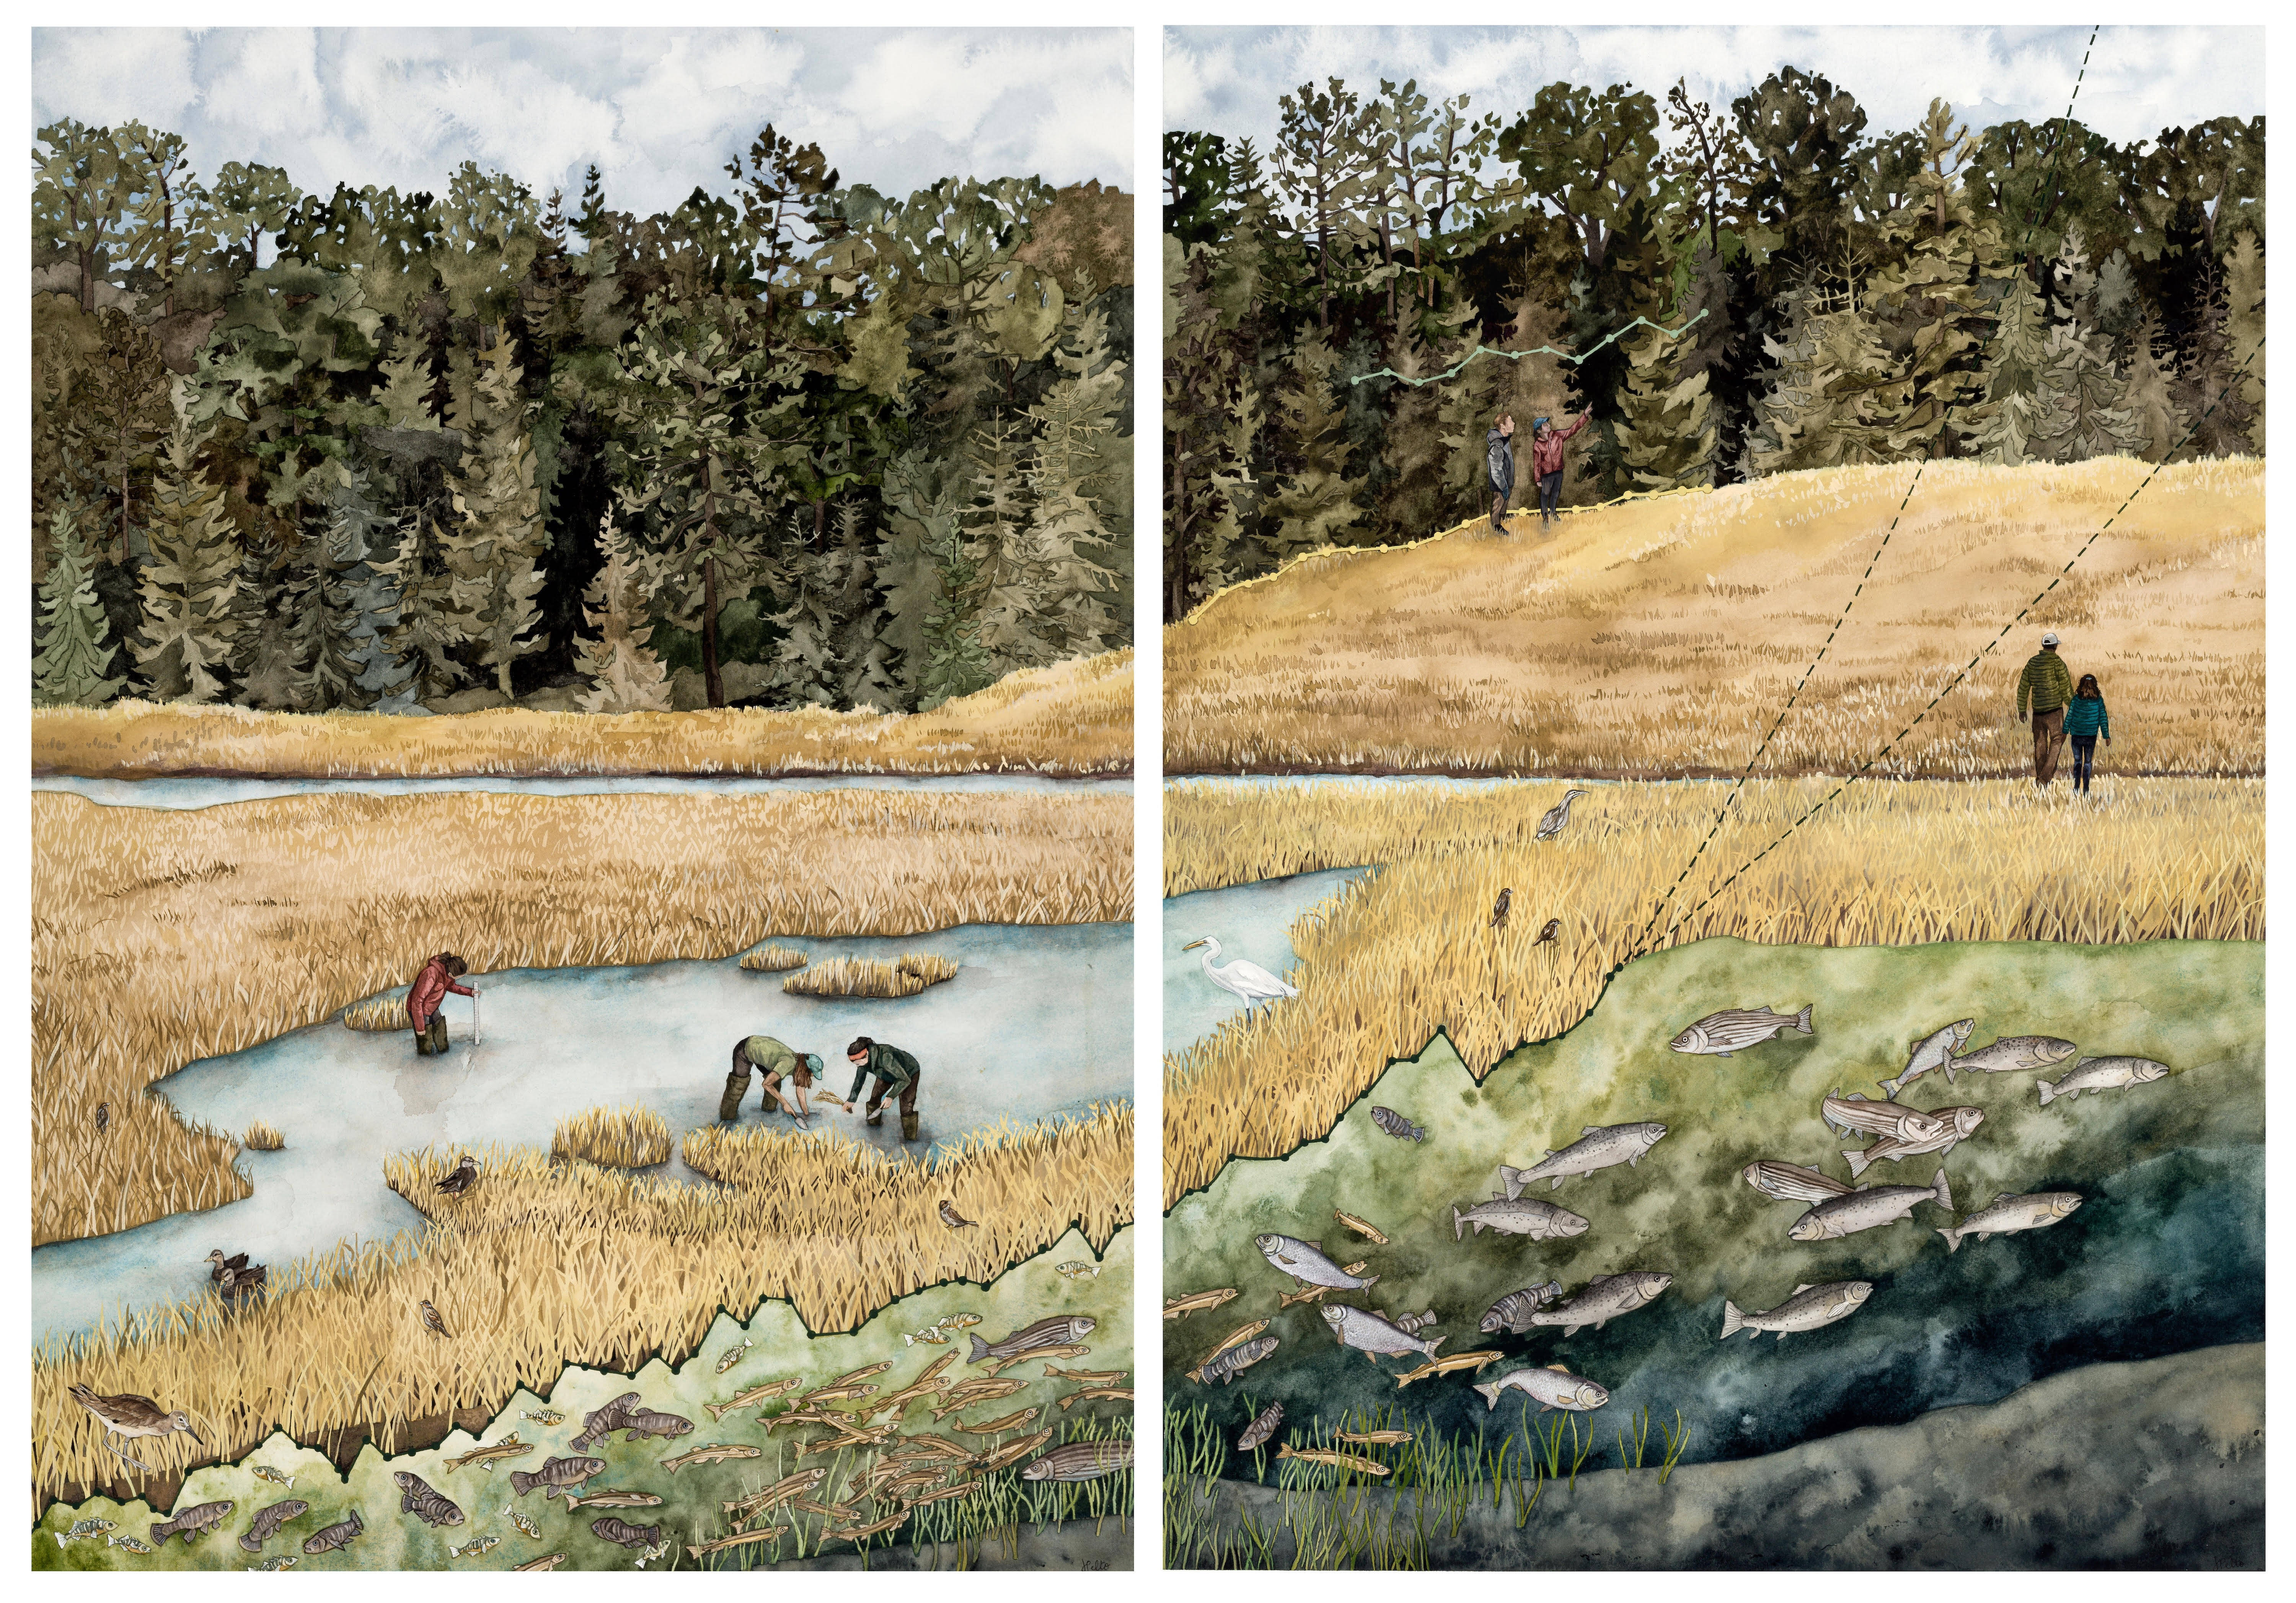 A vibrant landscape painting of people walking in a hay field, others standing on a hill with pine trees in the background, a stream with many fish swimming in it, birds and people in a pond planting and measuring water depth and birds all around.